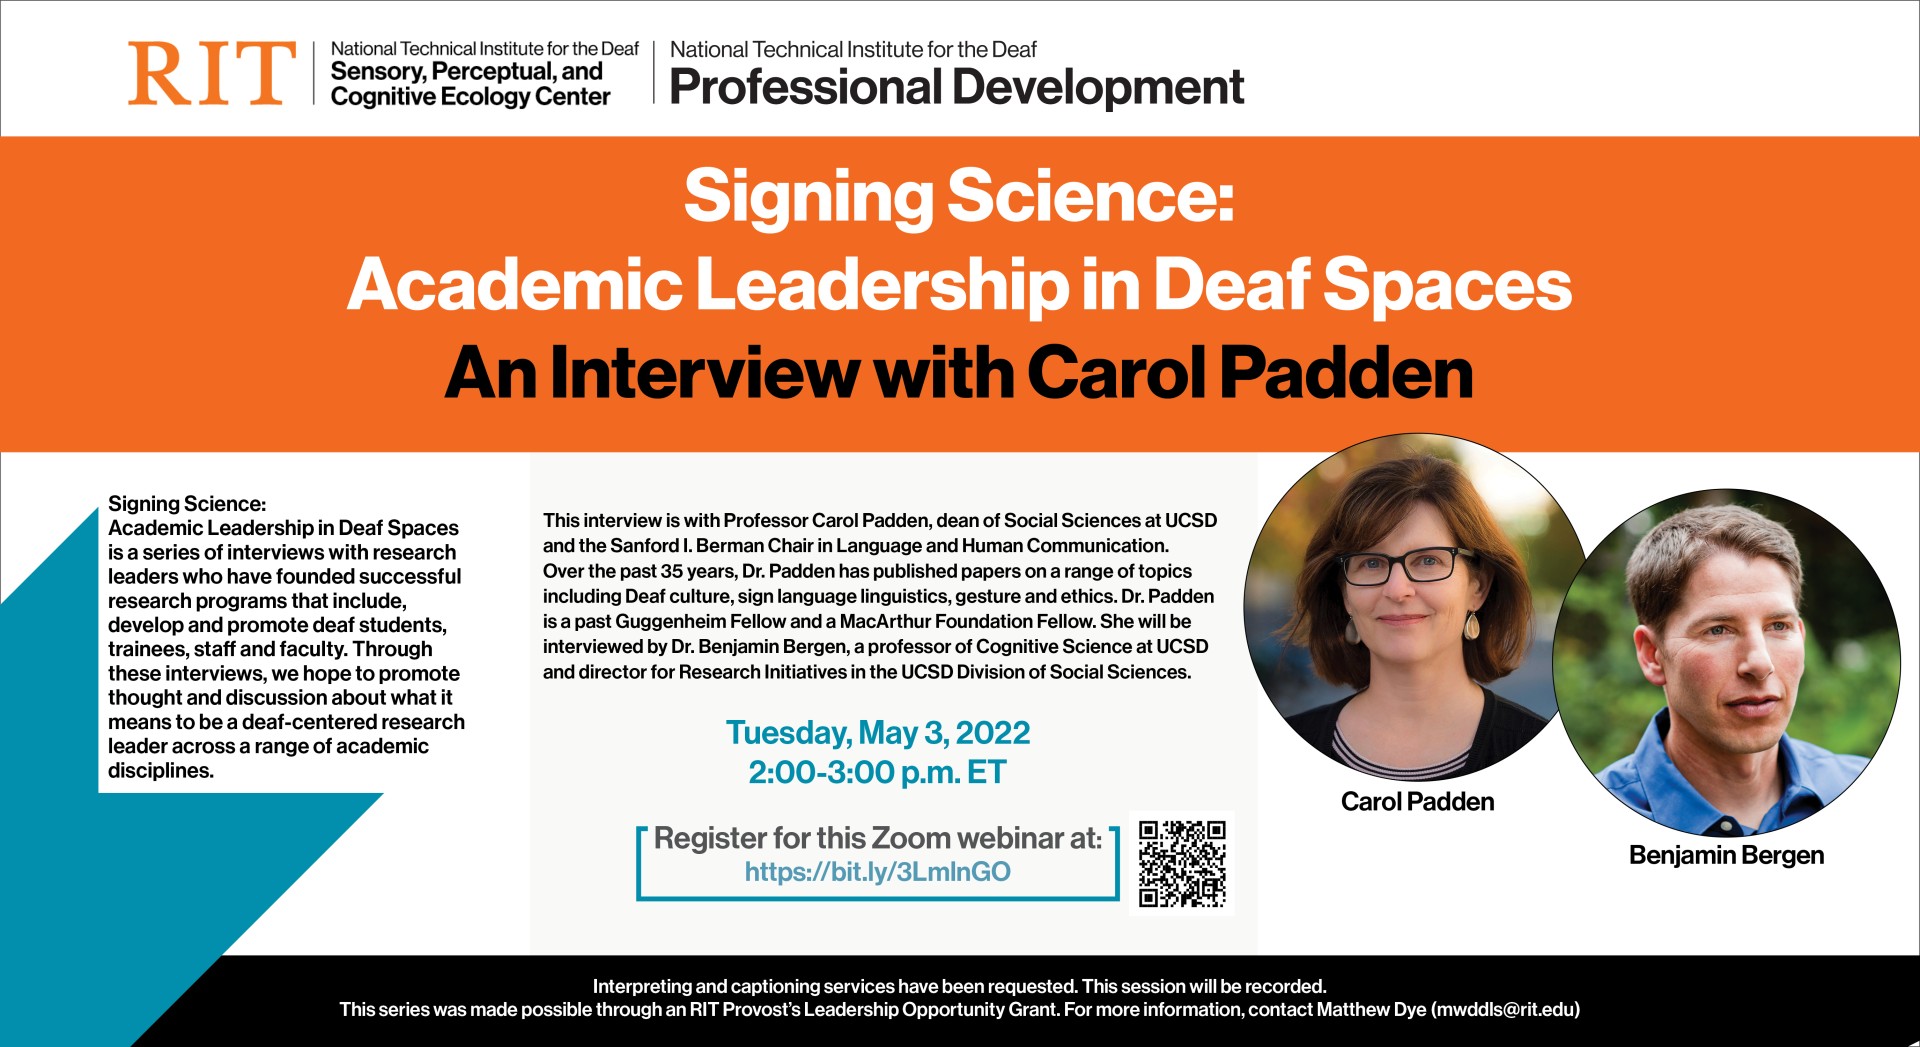 Flyer with NTID SPACE logo and NTID PD logo in black text on white background in the header. Workshop title on orange background (first two lines in white text, third line in black text); remaining text with event description in black font; blue RIT branding graphic on bottom left. Headshots of Carol Padden and Benjamin Bergen in graphic circles on the right. Registration info on bottom with QR code. Contact and accessibility information in footer, white text on black background.